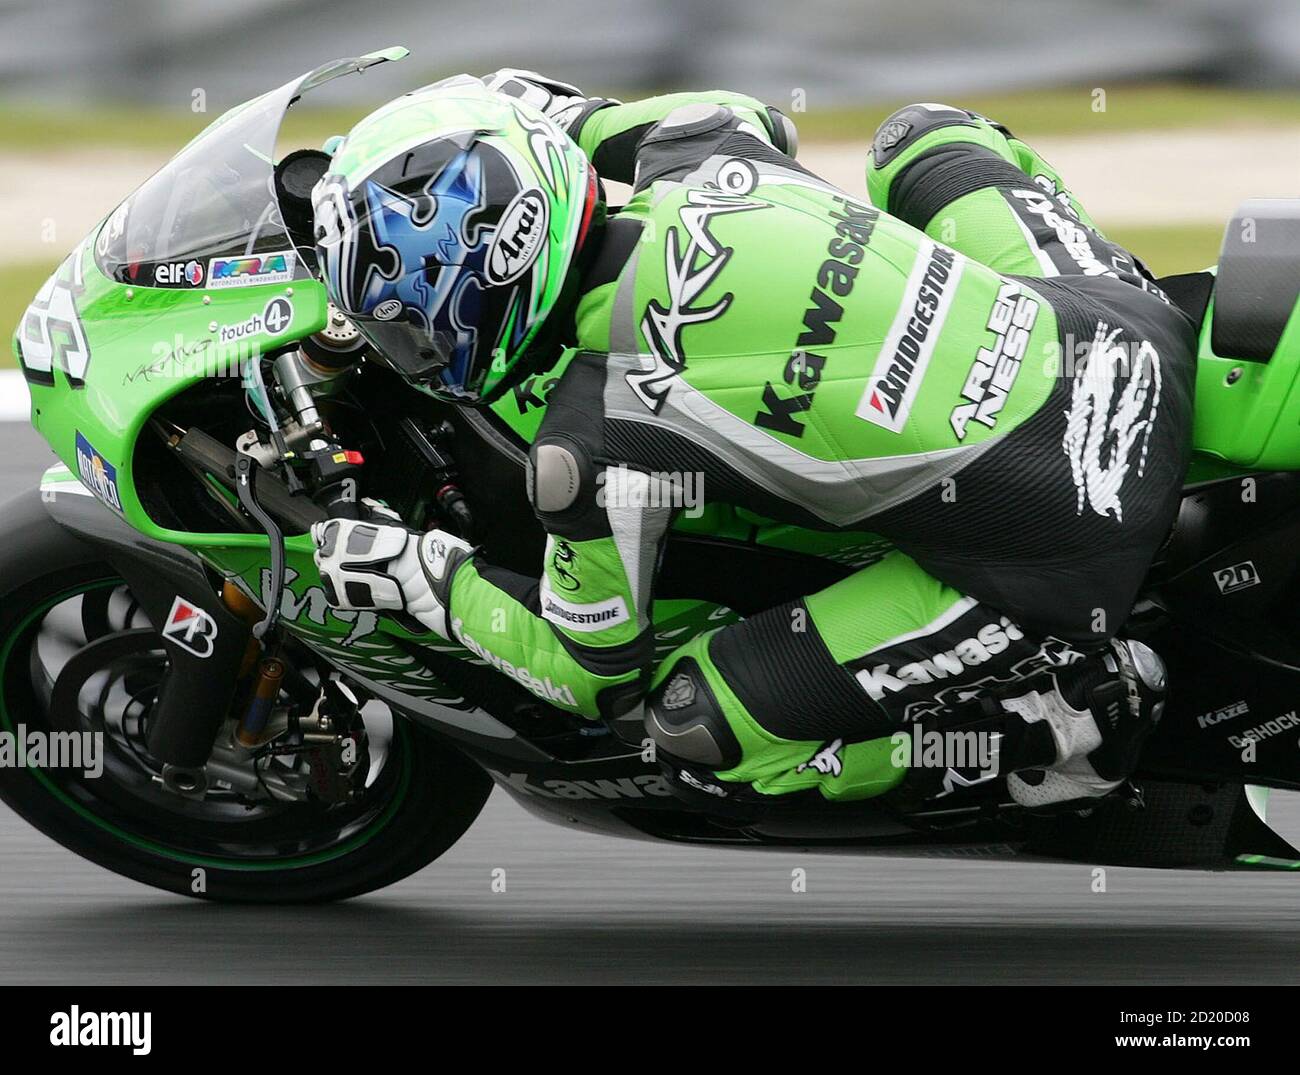 MotoGP Shinya Nakano of Japan rides his Kawasaki the qualifying to set the second fastest time and will start from the front row of the grid for the Australian